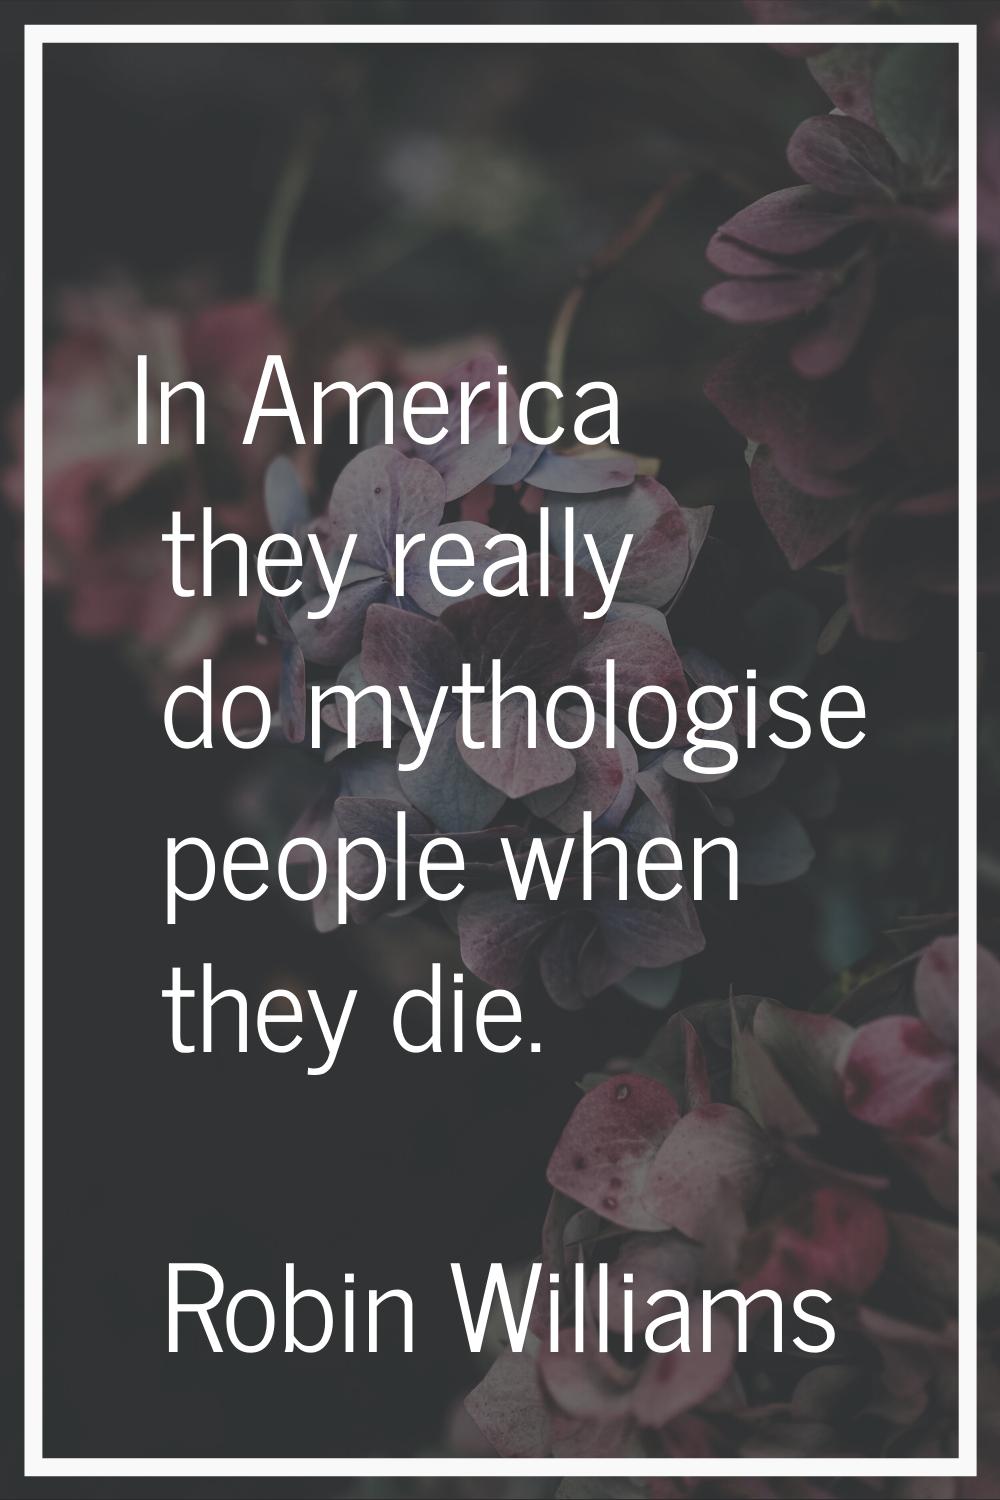 In America they really do mythologise people when they die.